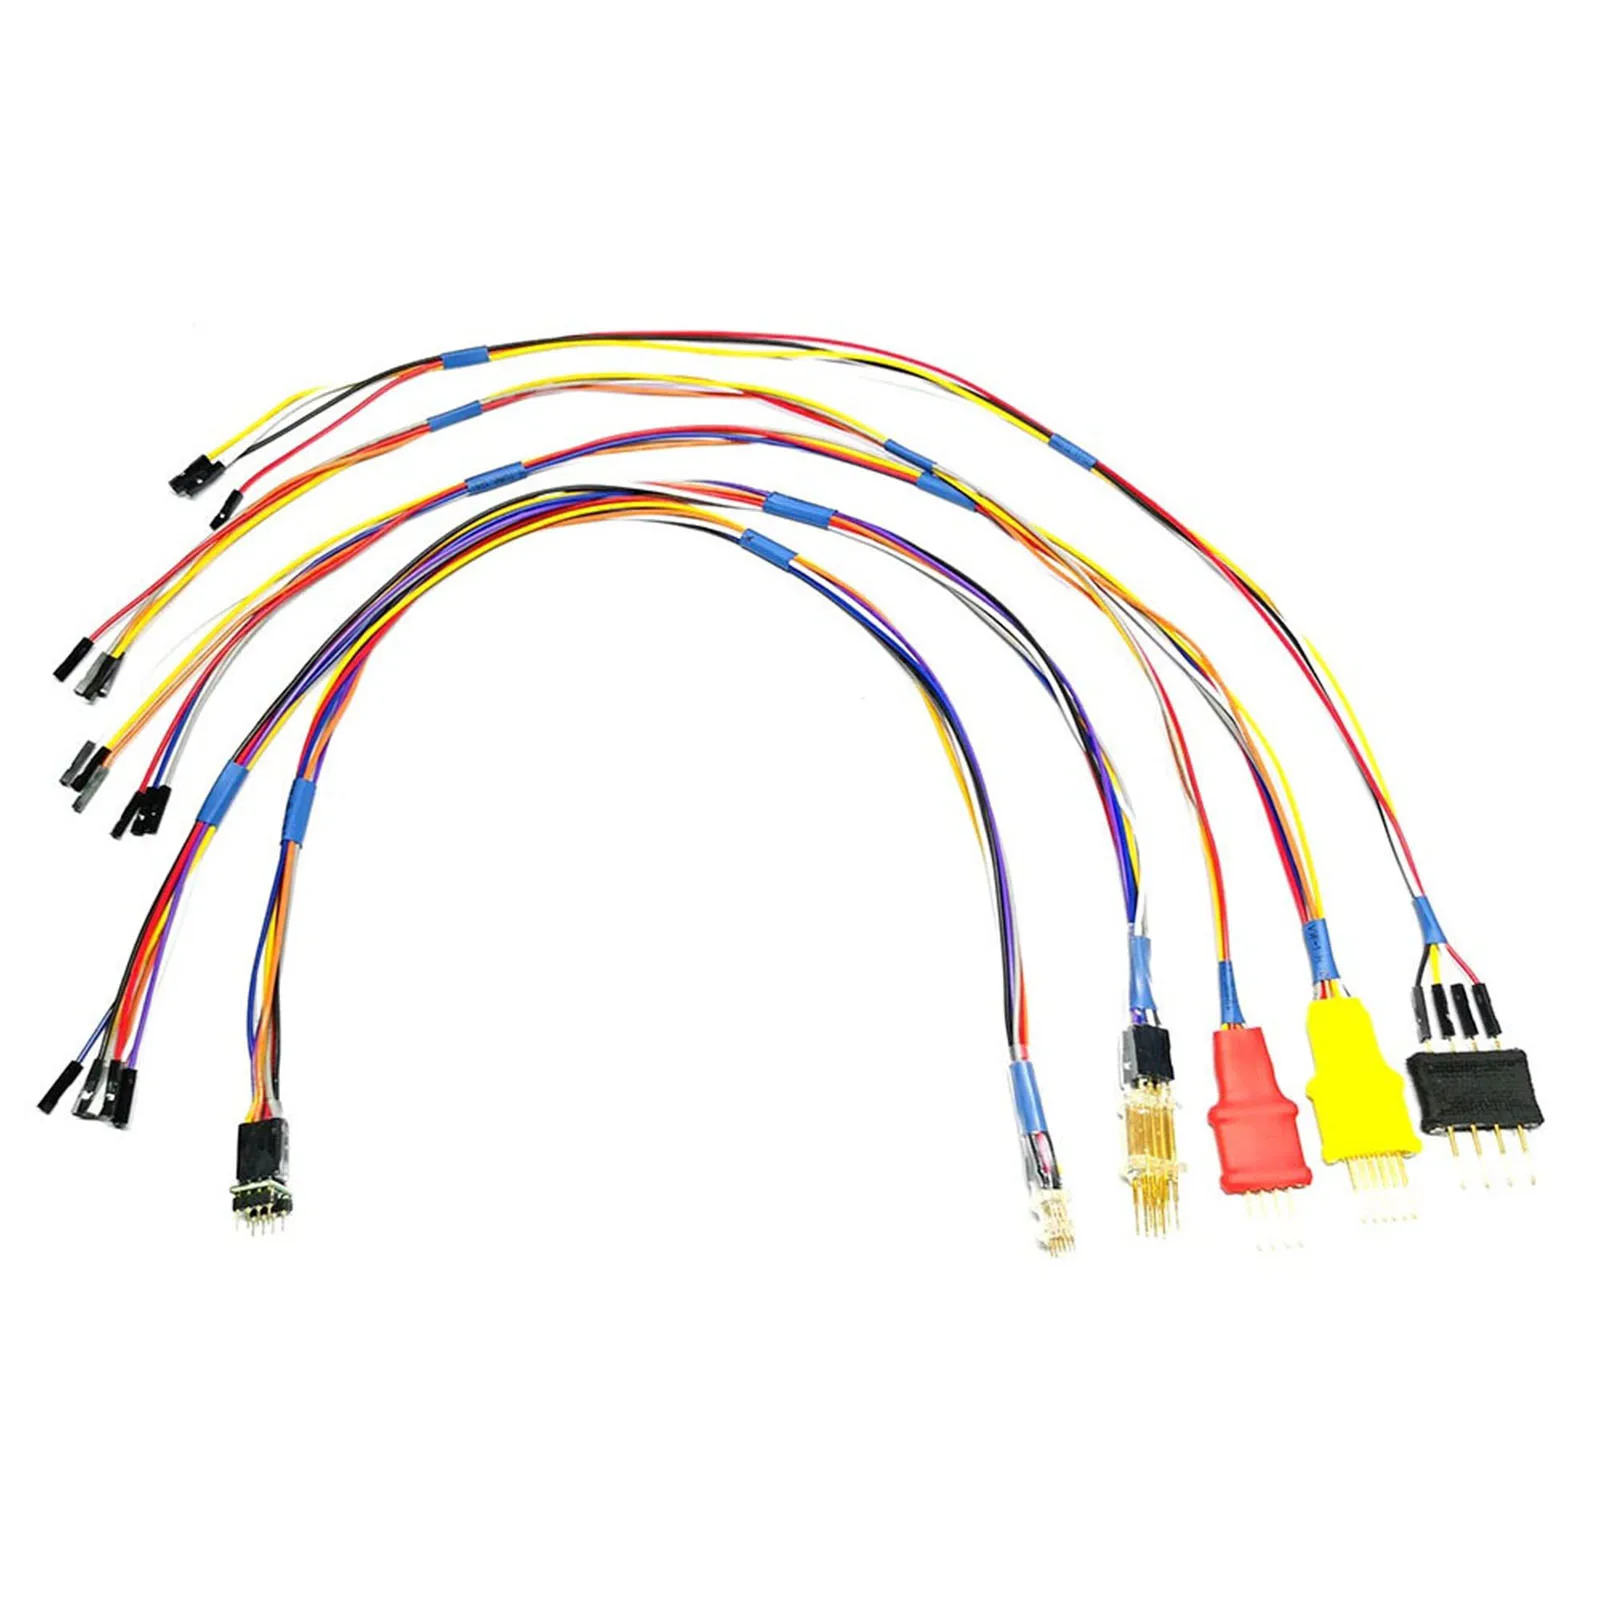 

Easily Work Pins Probe Adapters ECU Programmer Probe Adapter ECU Cables Works For Xprog Programmer Without Soldering Pins